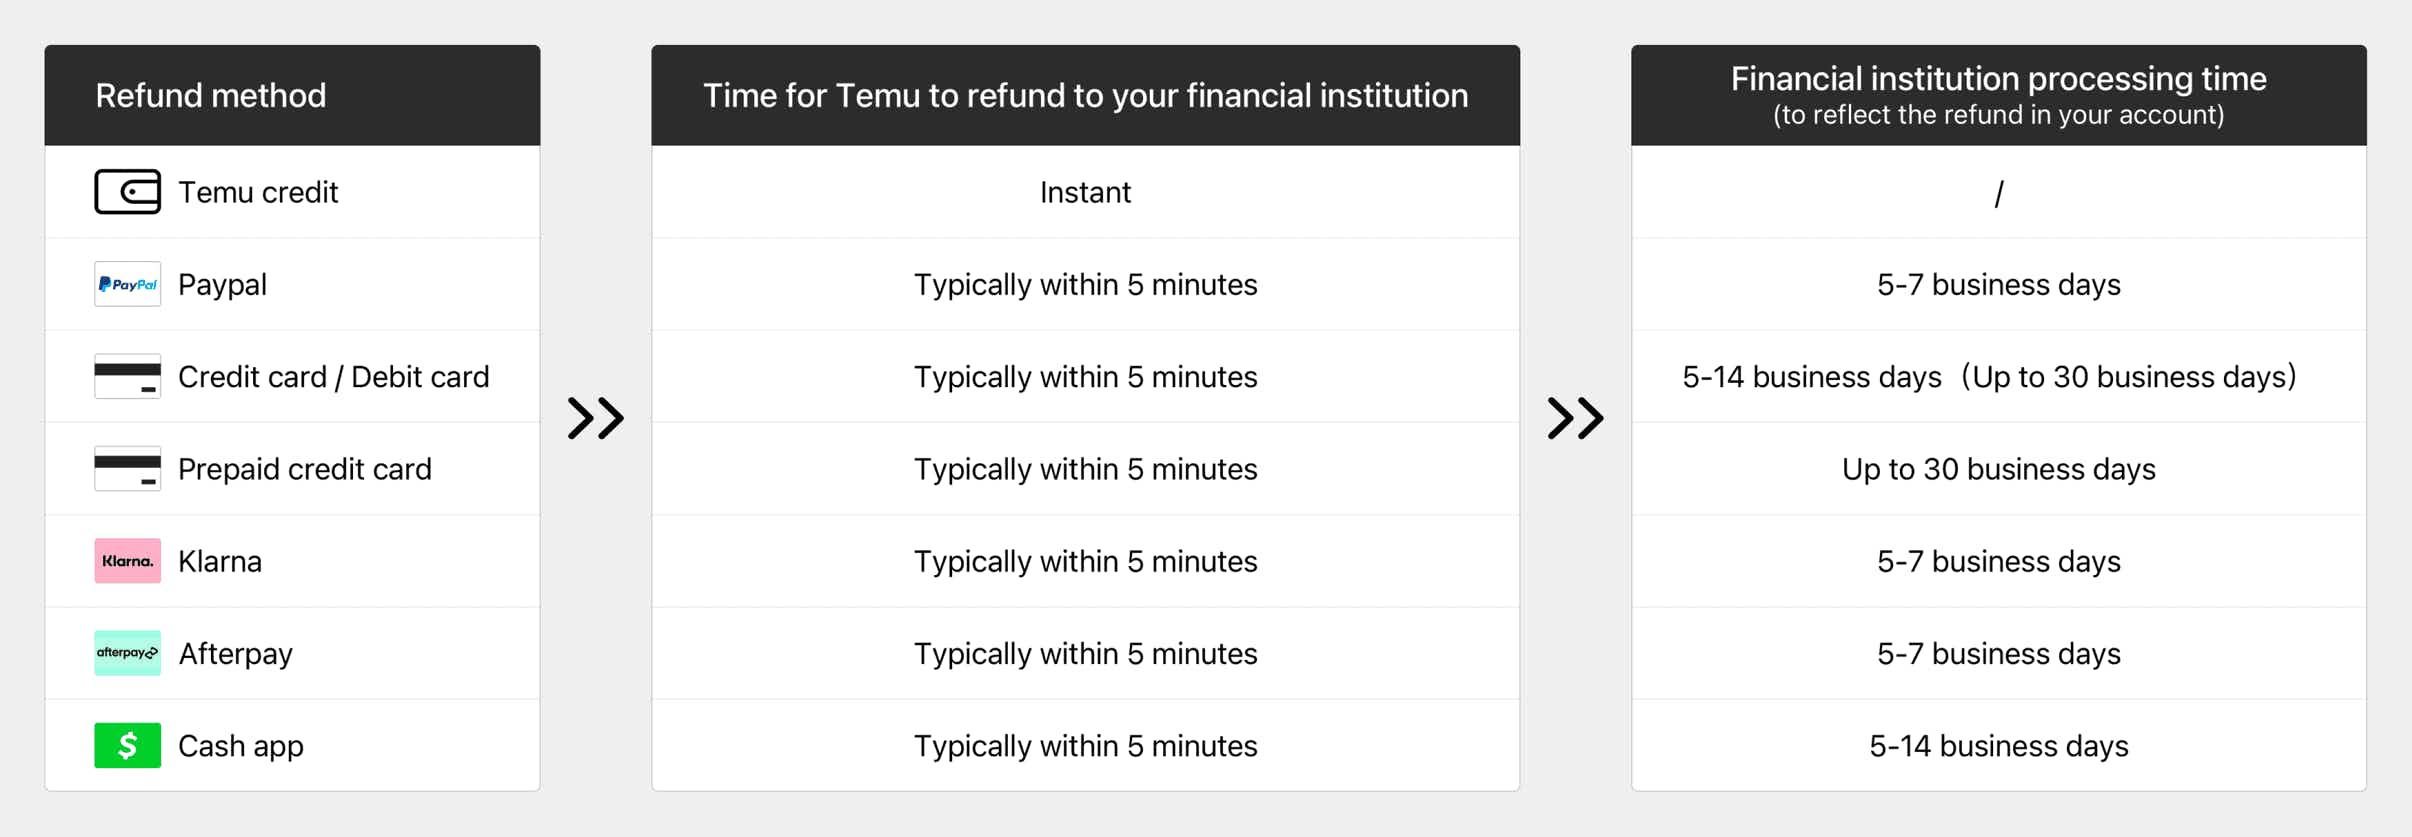 A chart showing the refund processing times for Temu returns based on type of payment used